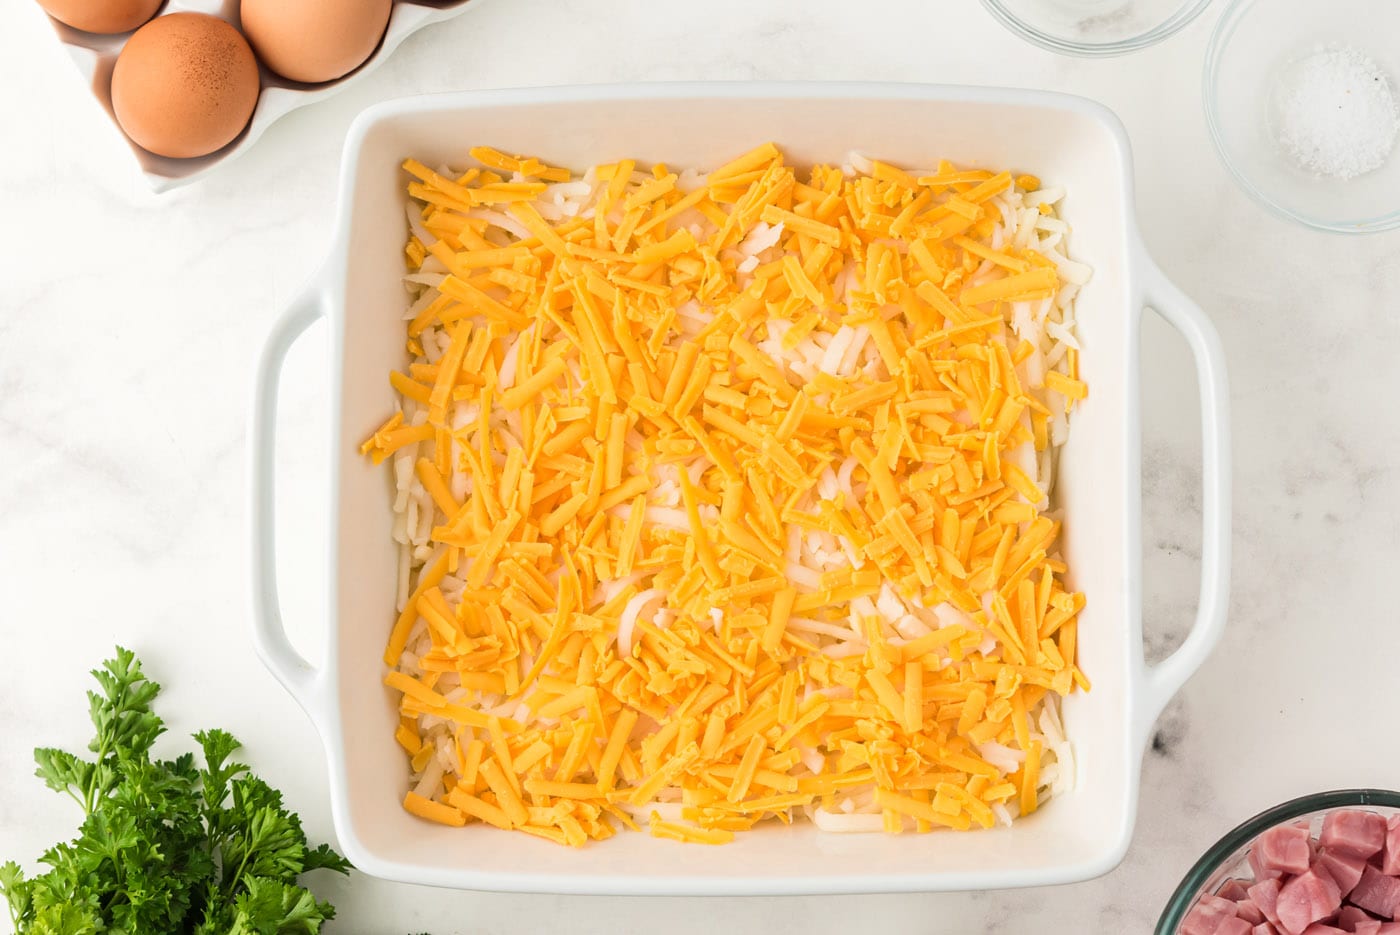 cheddar cheese in a baking dish